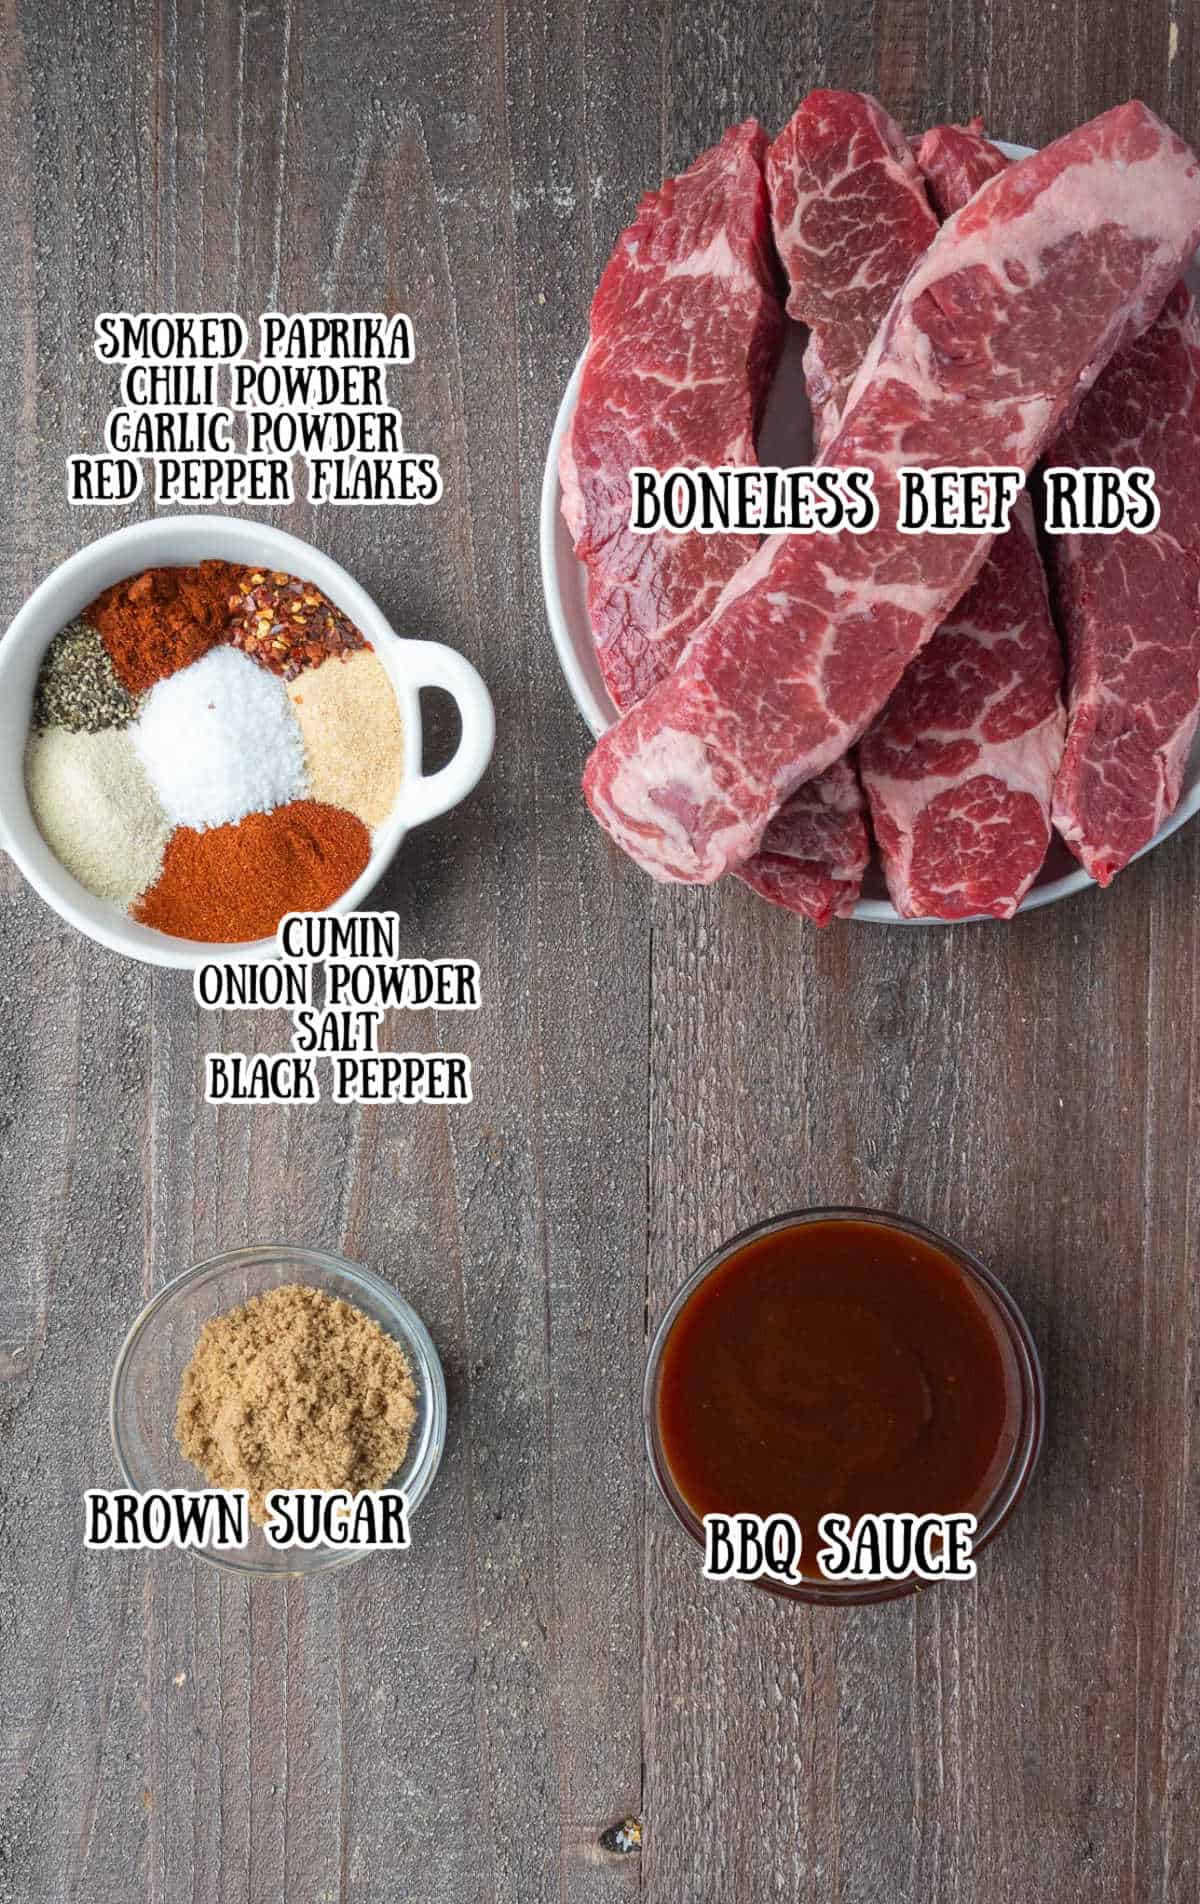 All the ingredients needed for these boneless baked ribs.